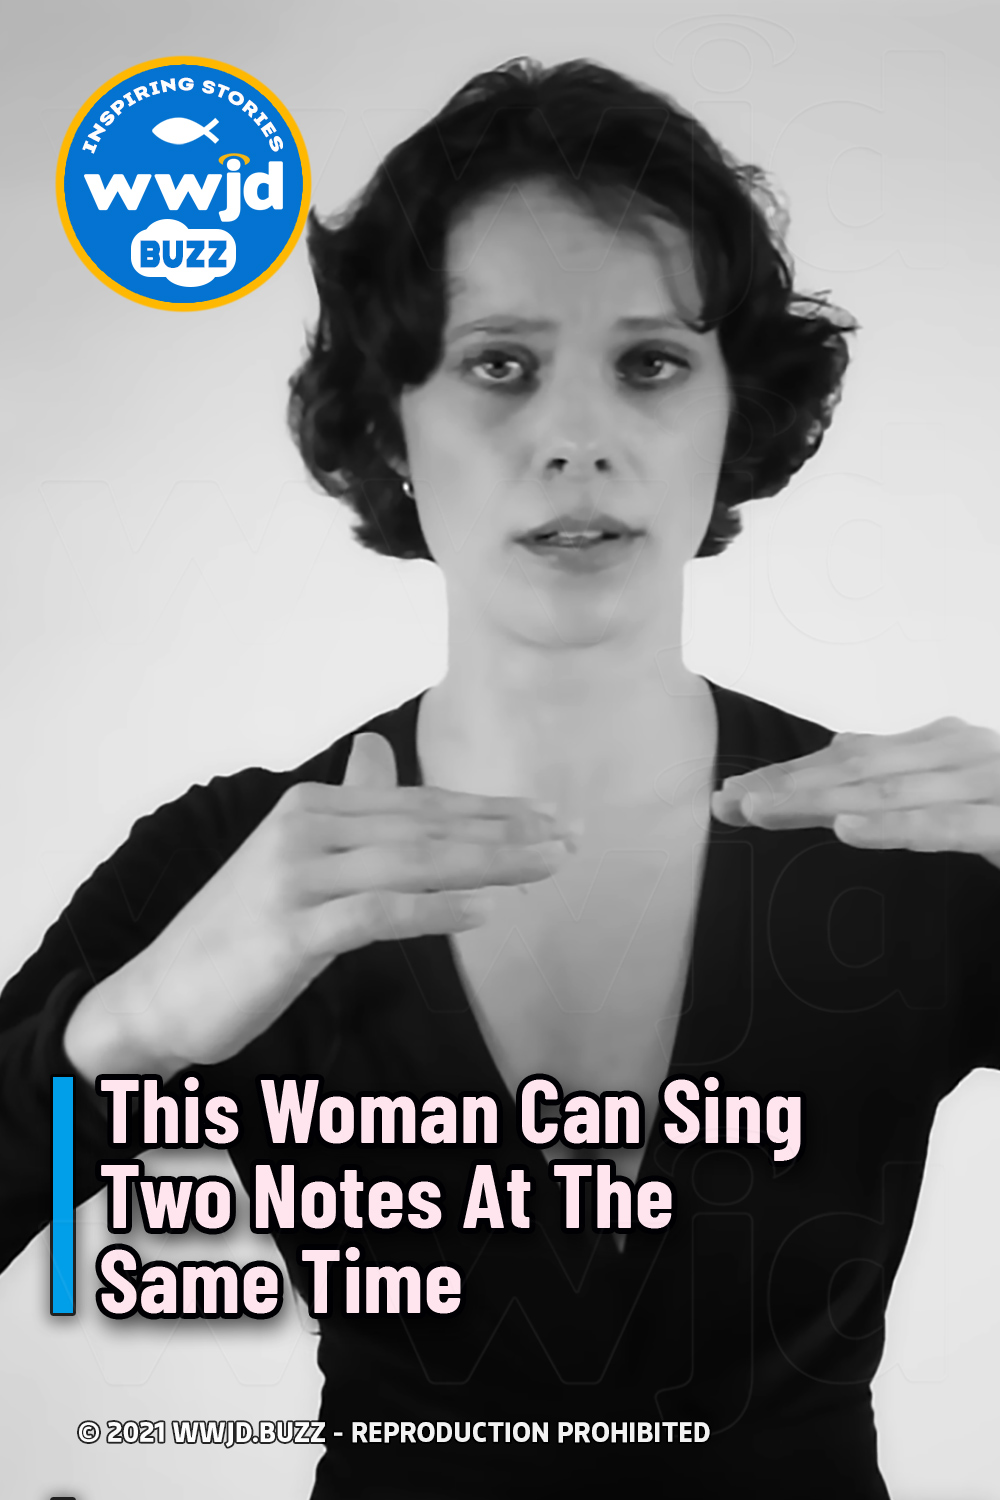 This Woman Can Sing Two Notes At The Same Time